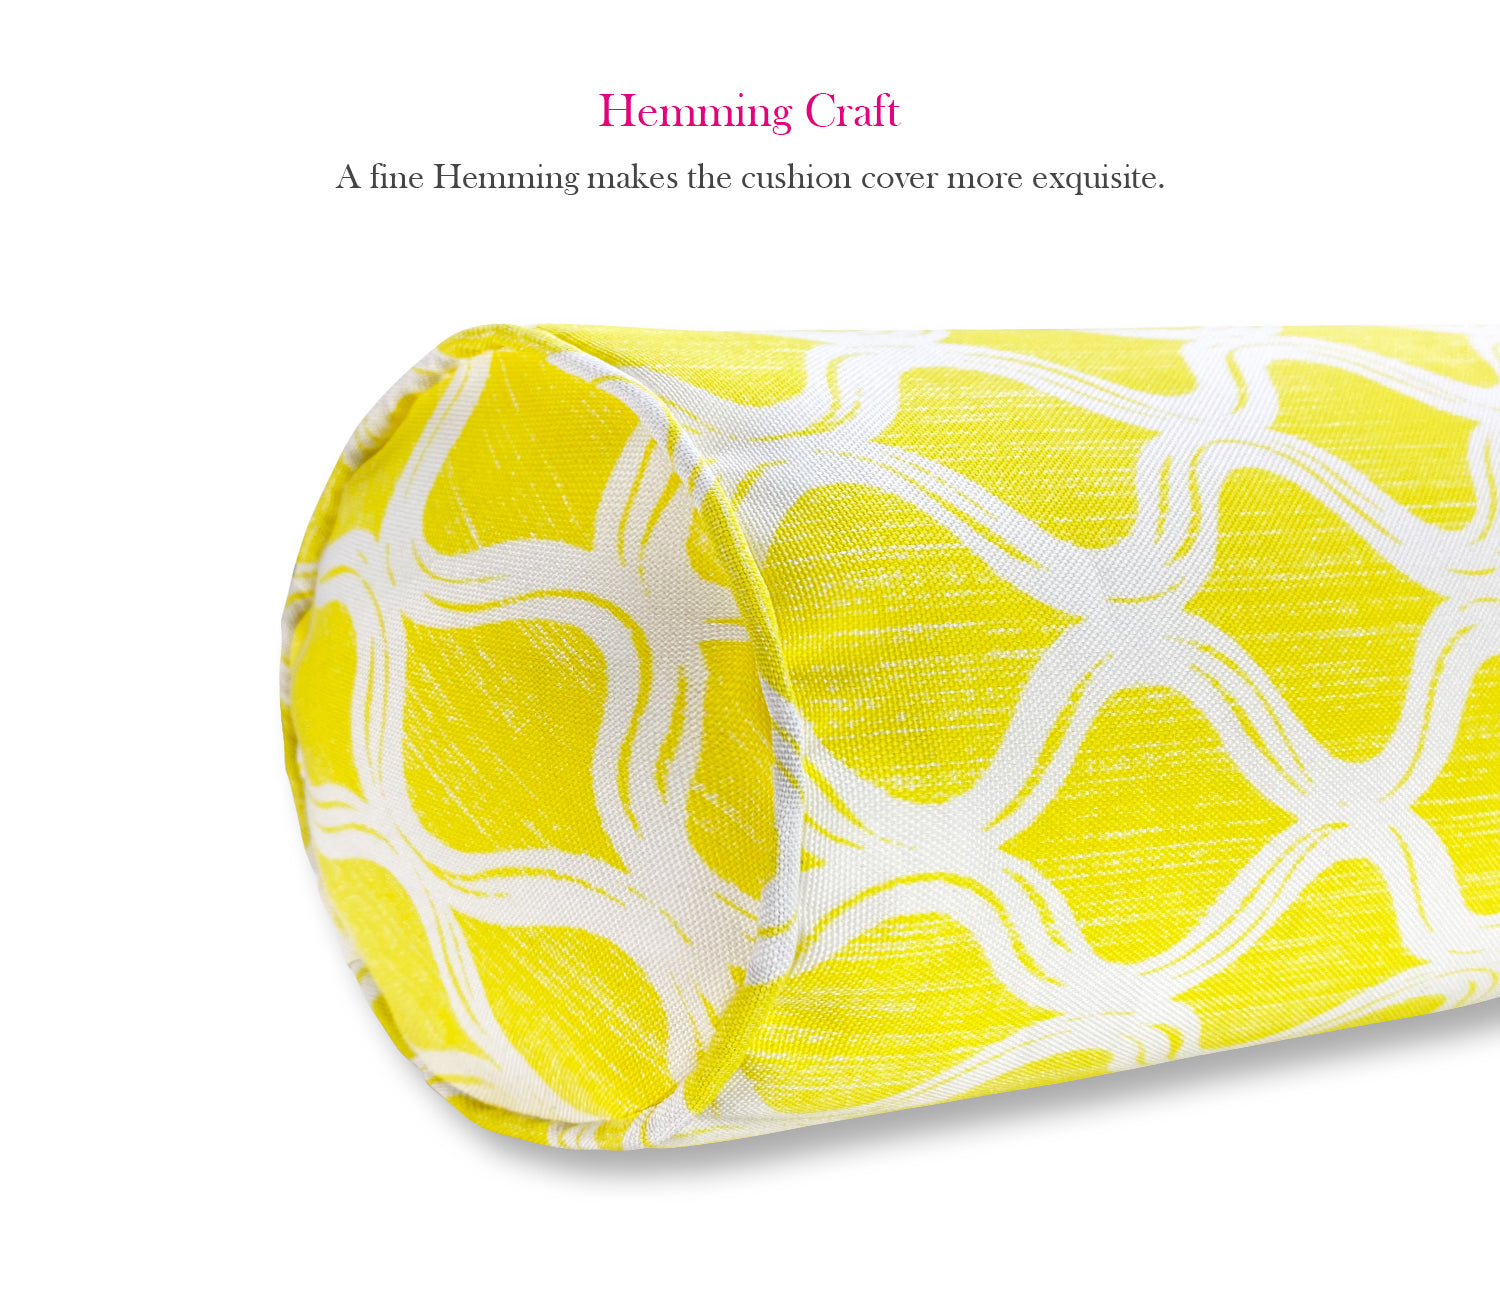 Outdoor Bolster Pillows Set of 2 Yellow Geometry Round 20x6 Inch Patio Neck Roll Pillows